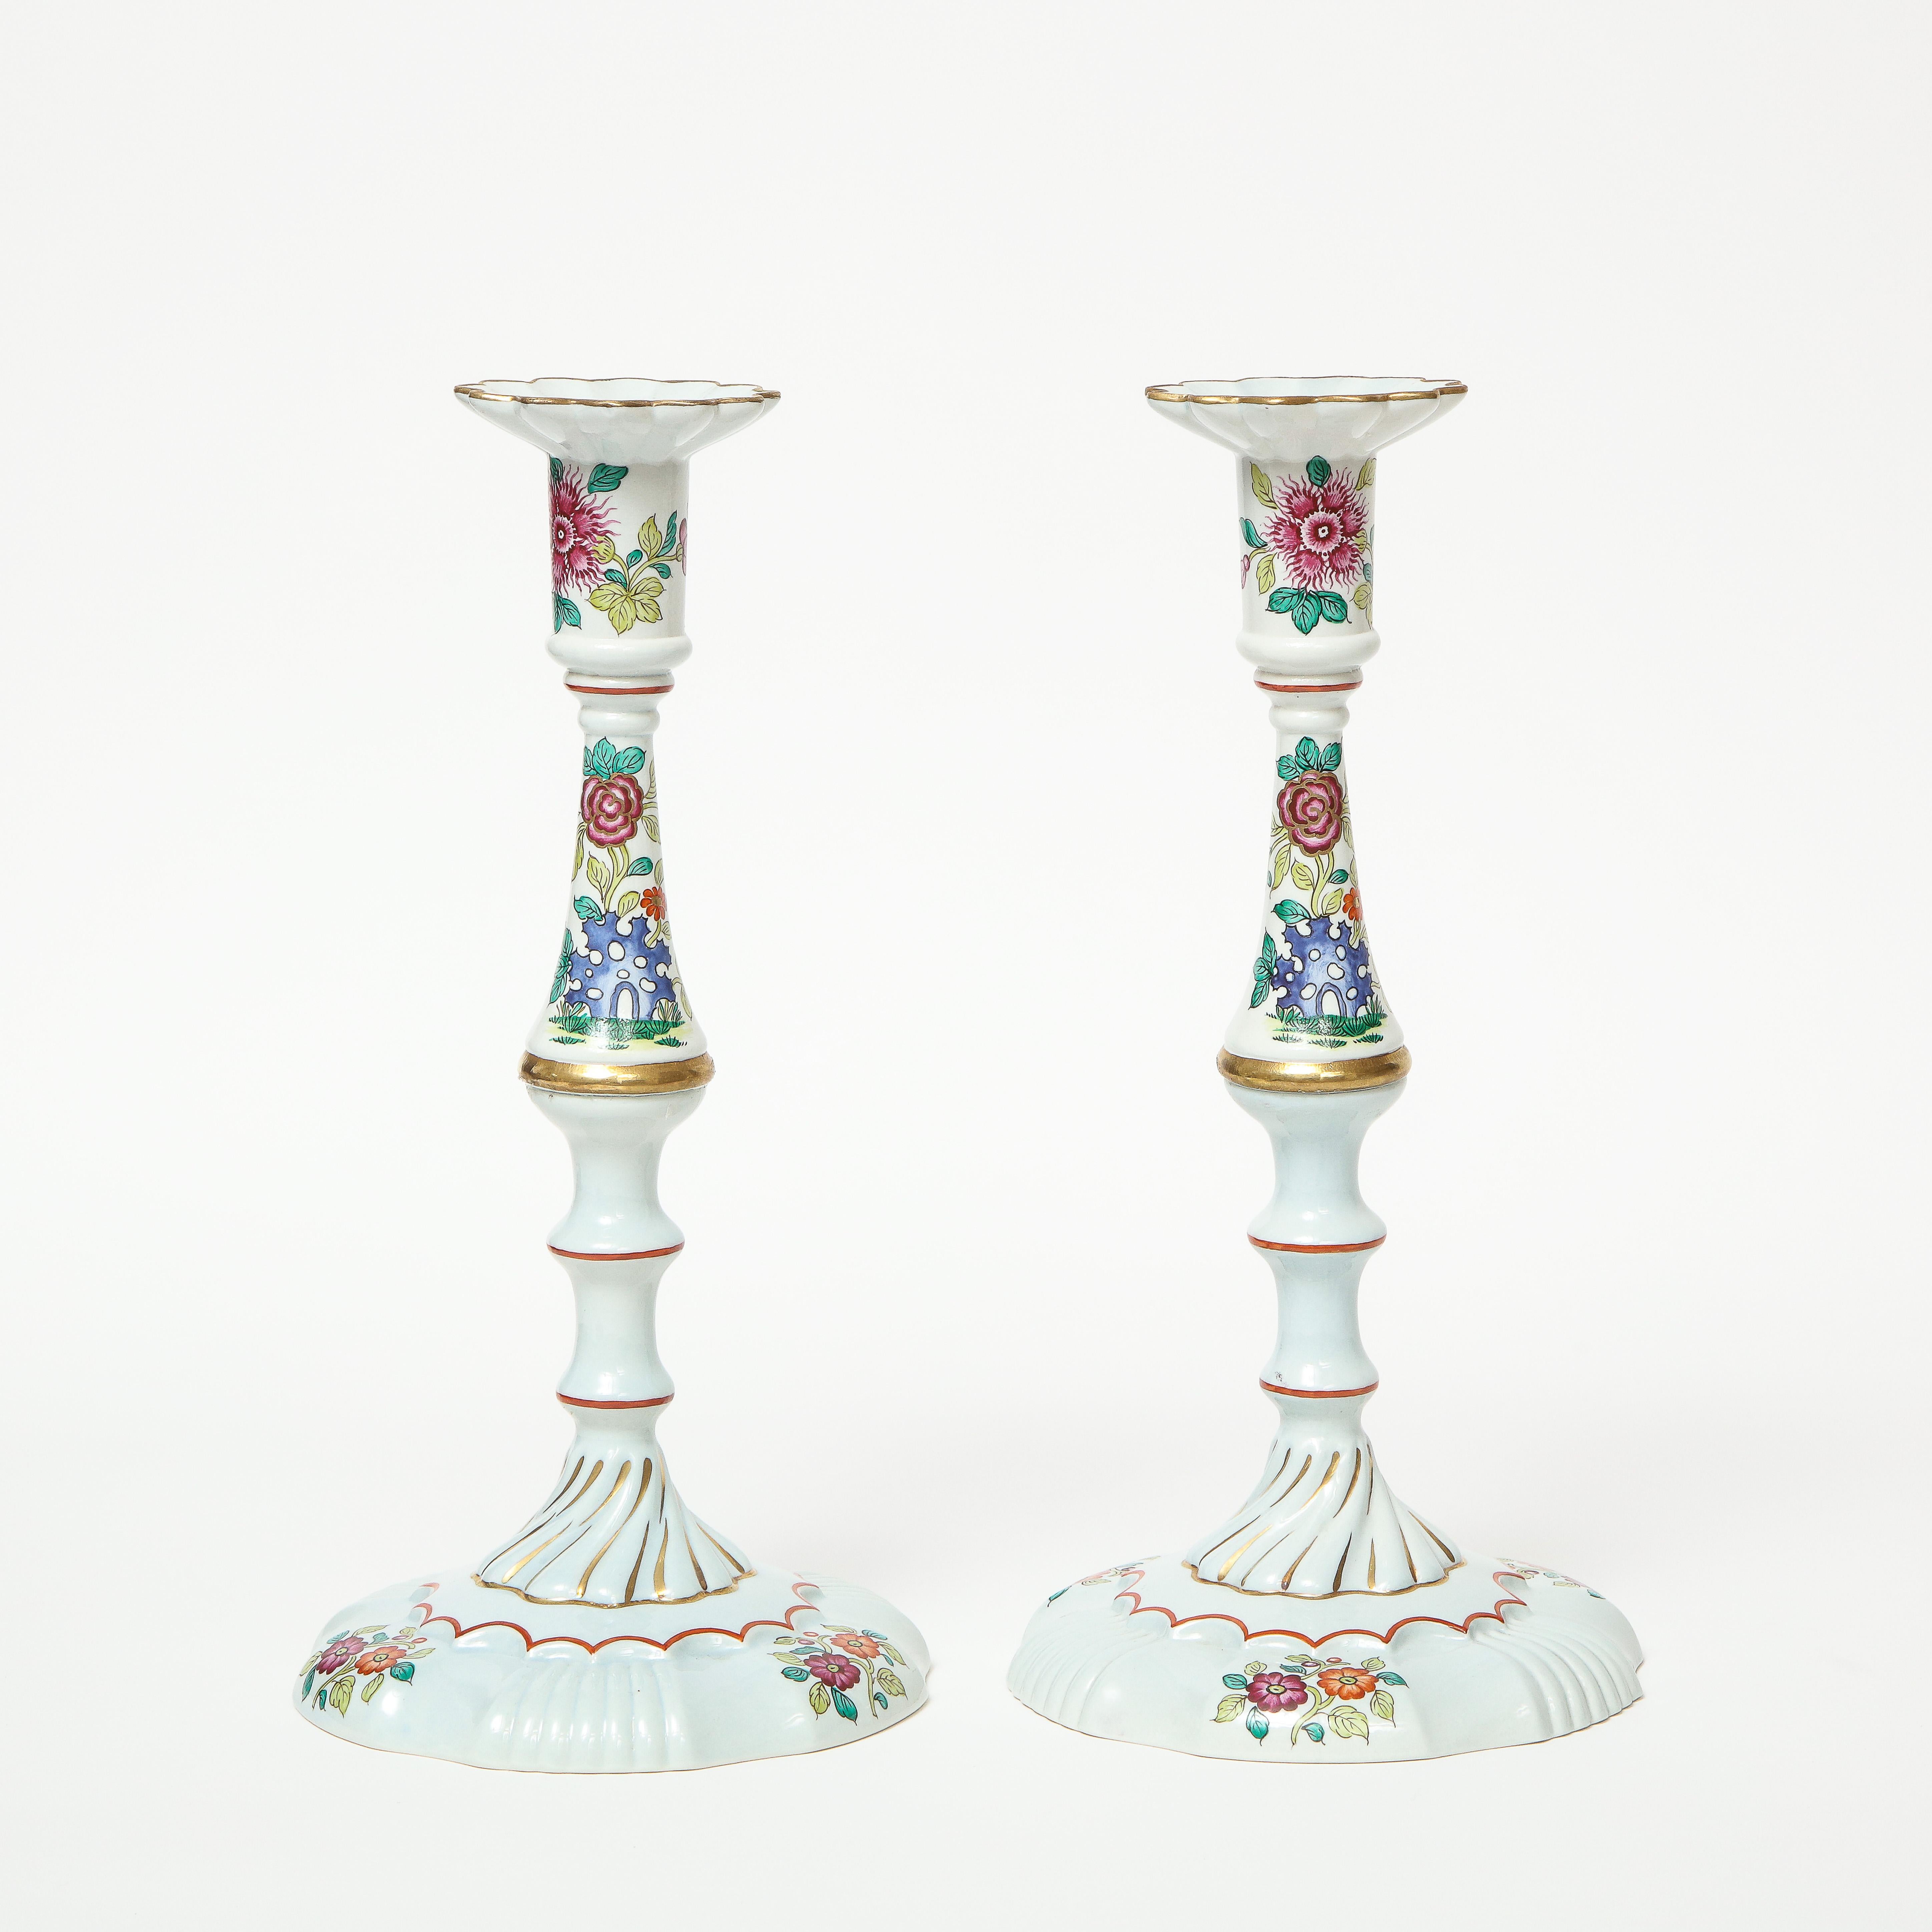 Each of Rococo design; painted overall with polychrome Chinese style floral and rock motifs, each knob gilt-rimmed. Drilled so they can be turned into lamps.